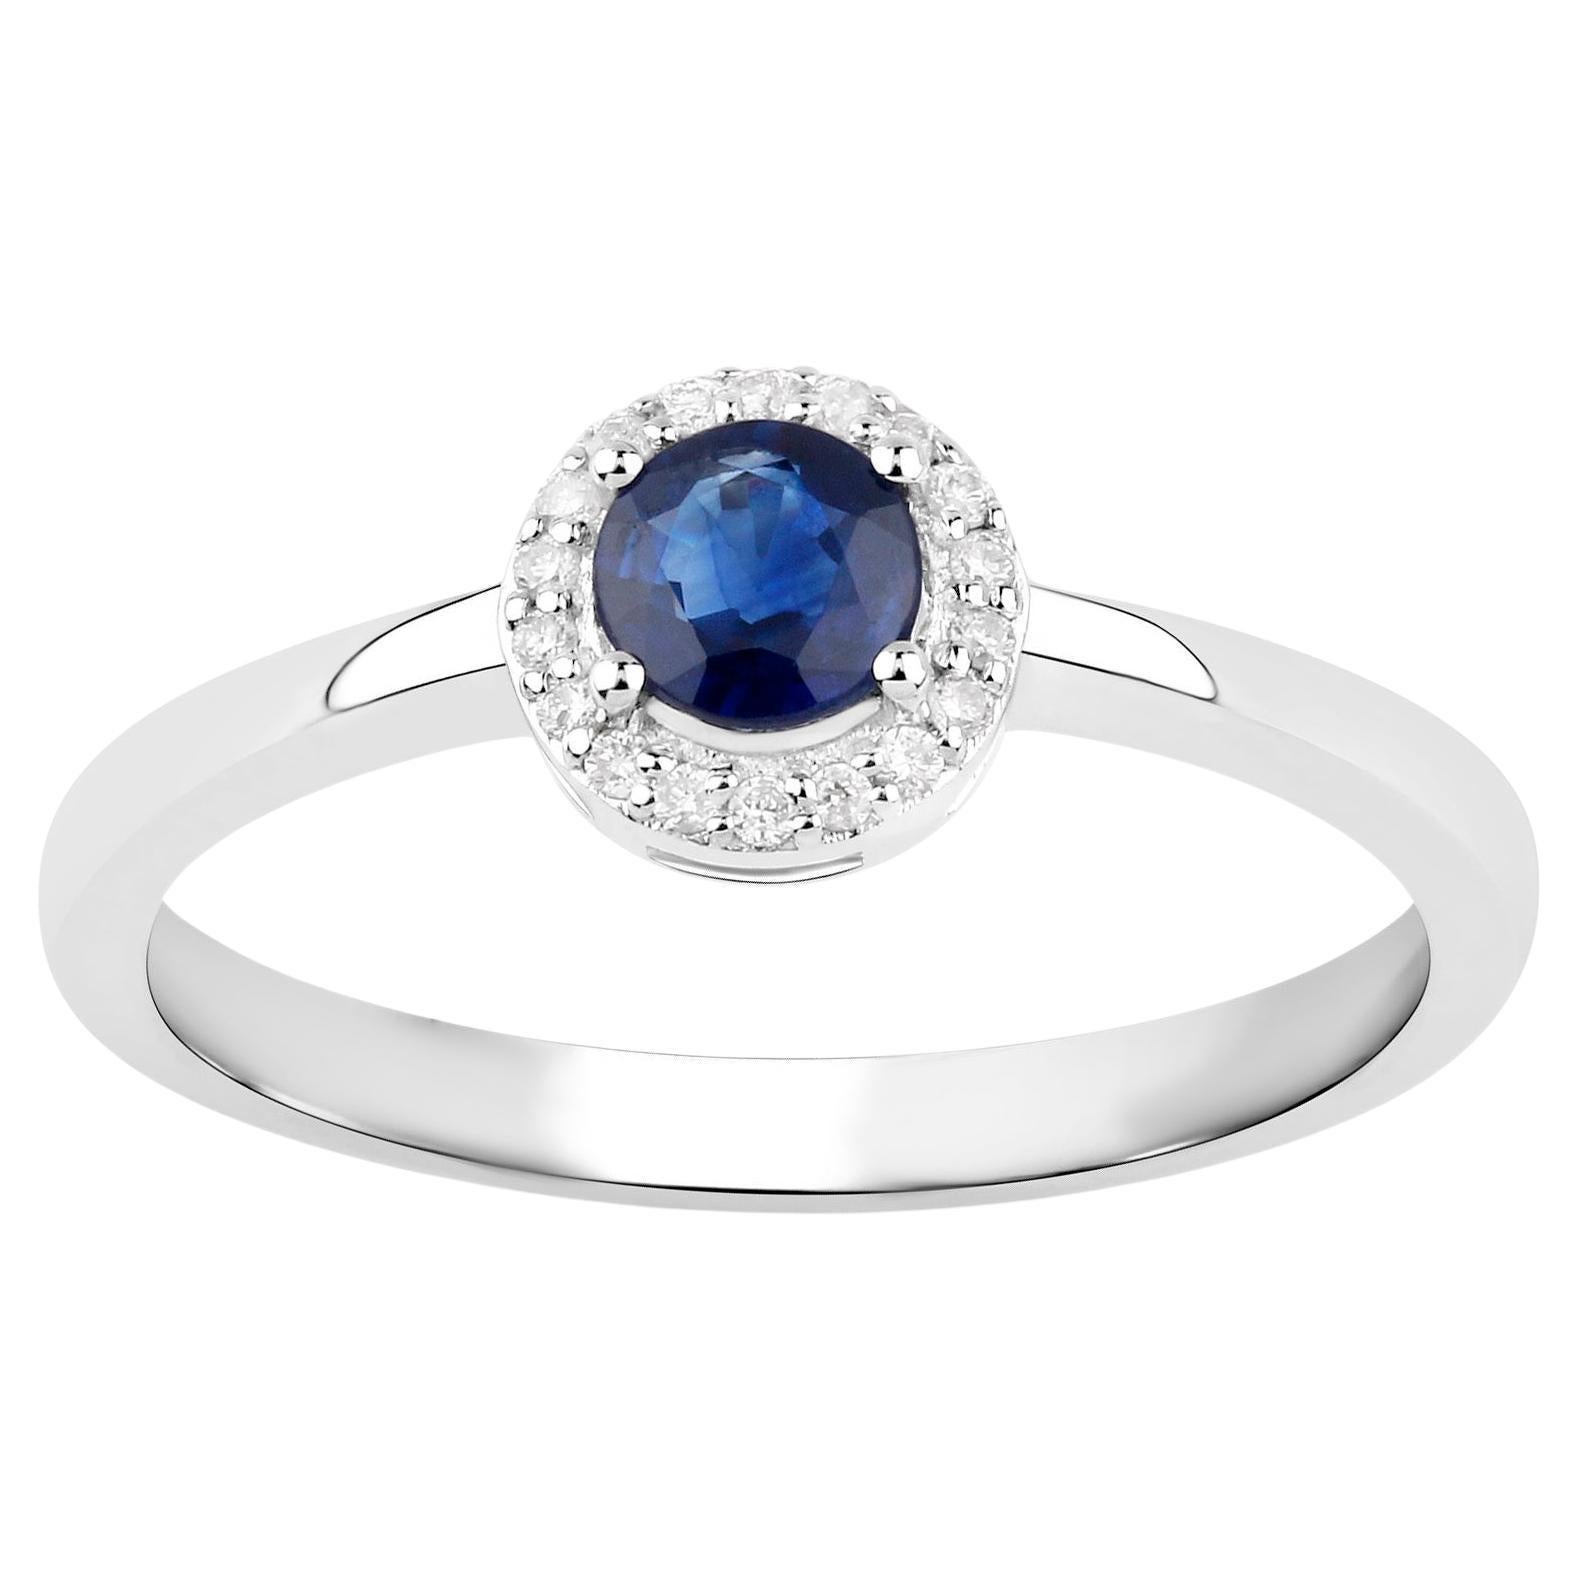 Blue Sapphire Ring With Diamonds 0.52 Carats 14K White Gold For Sale